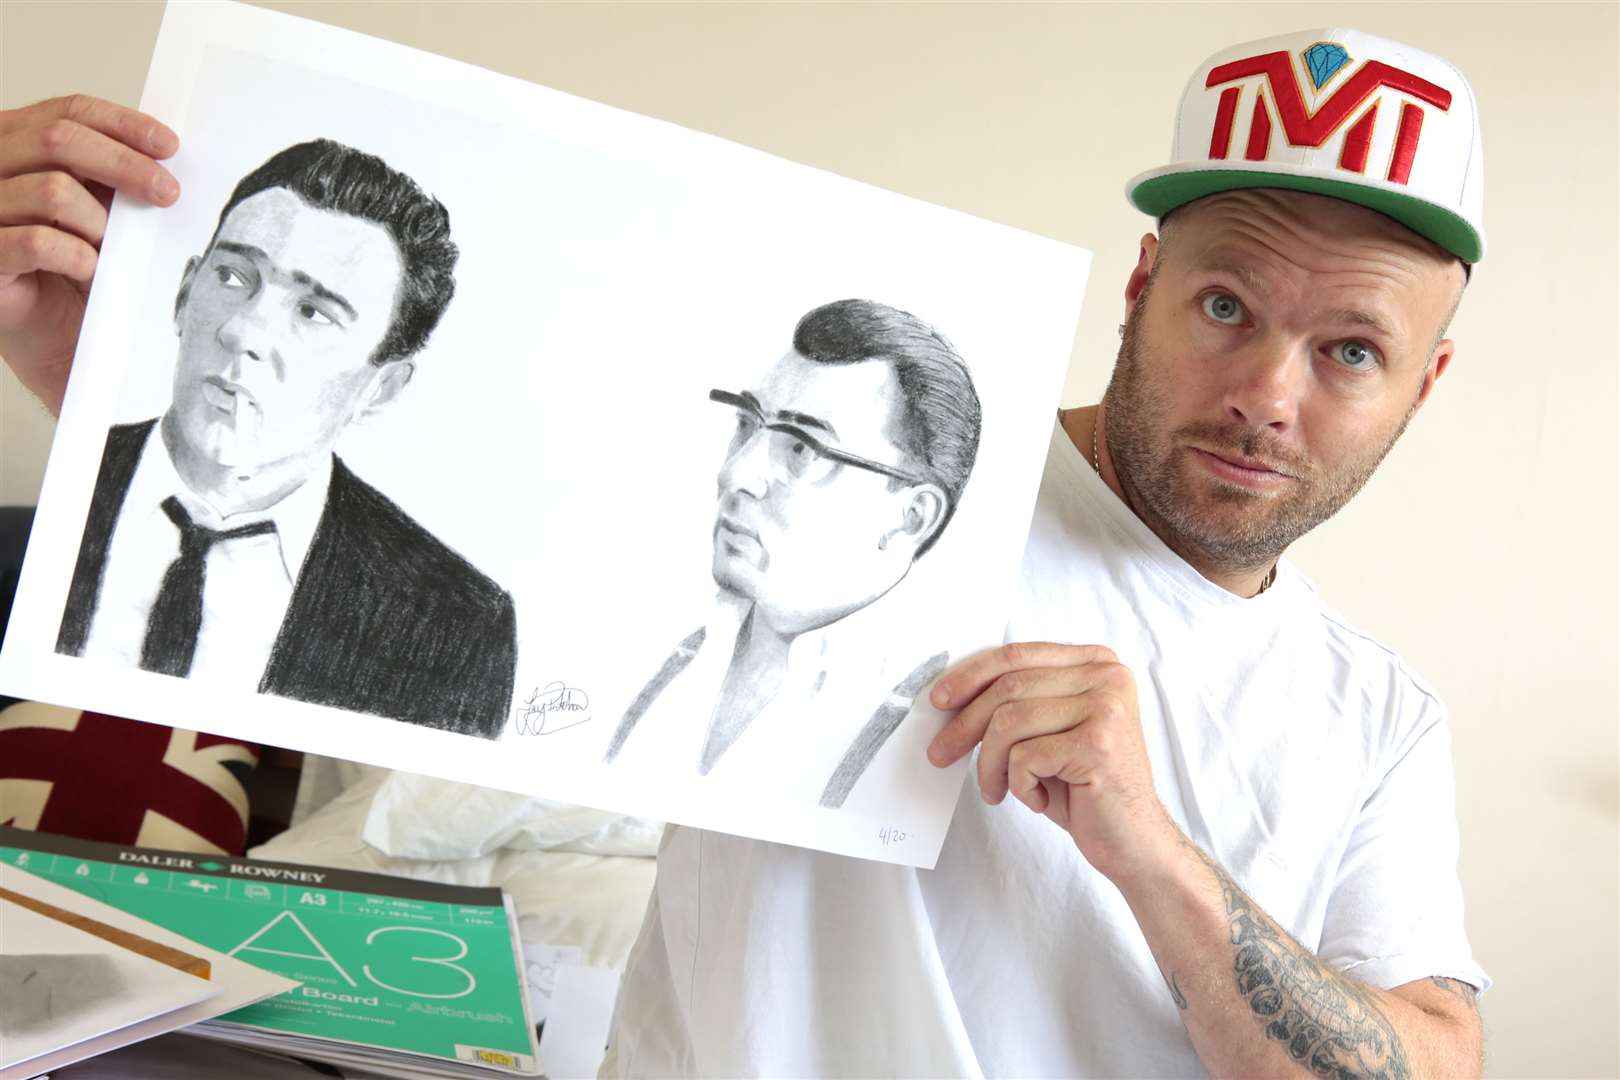 Jay displays his sketch of the Kray twins